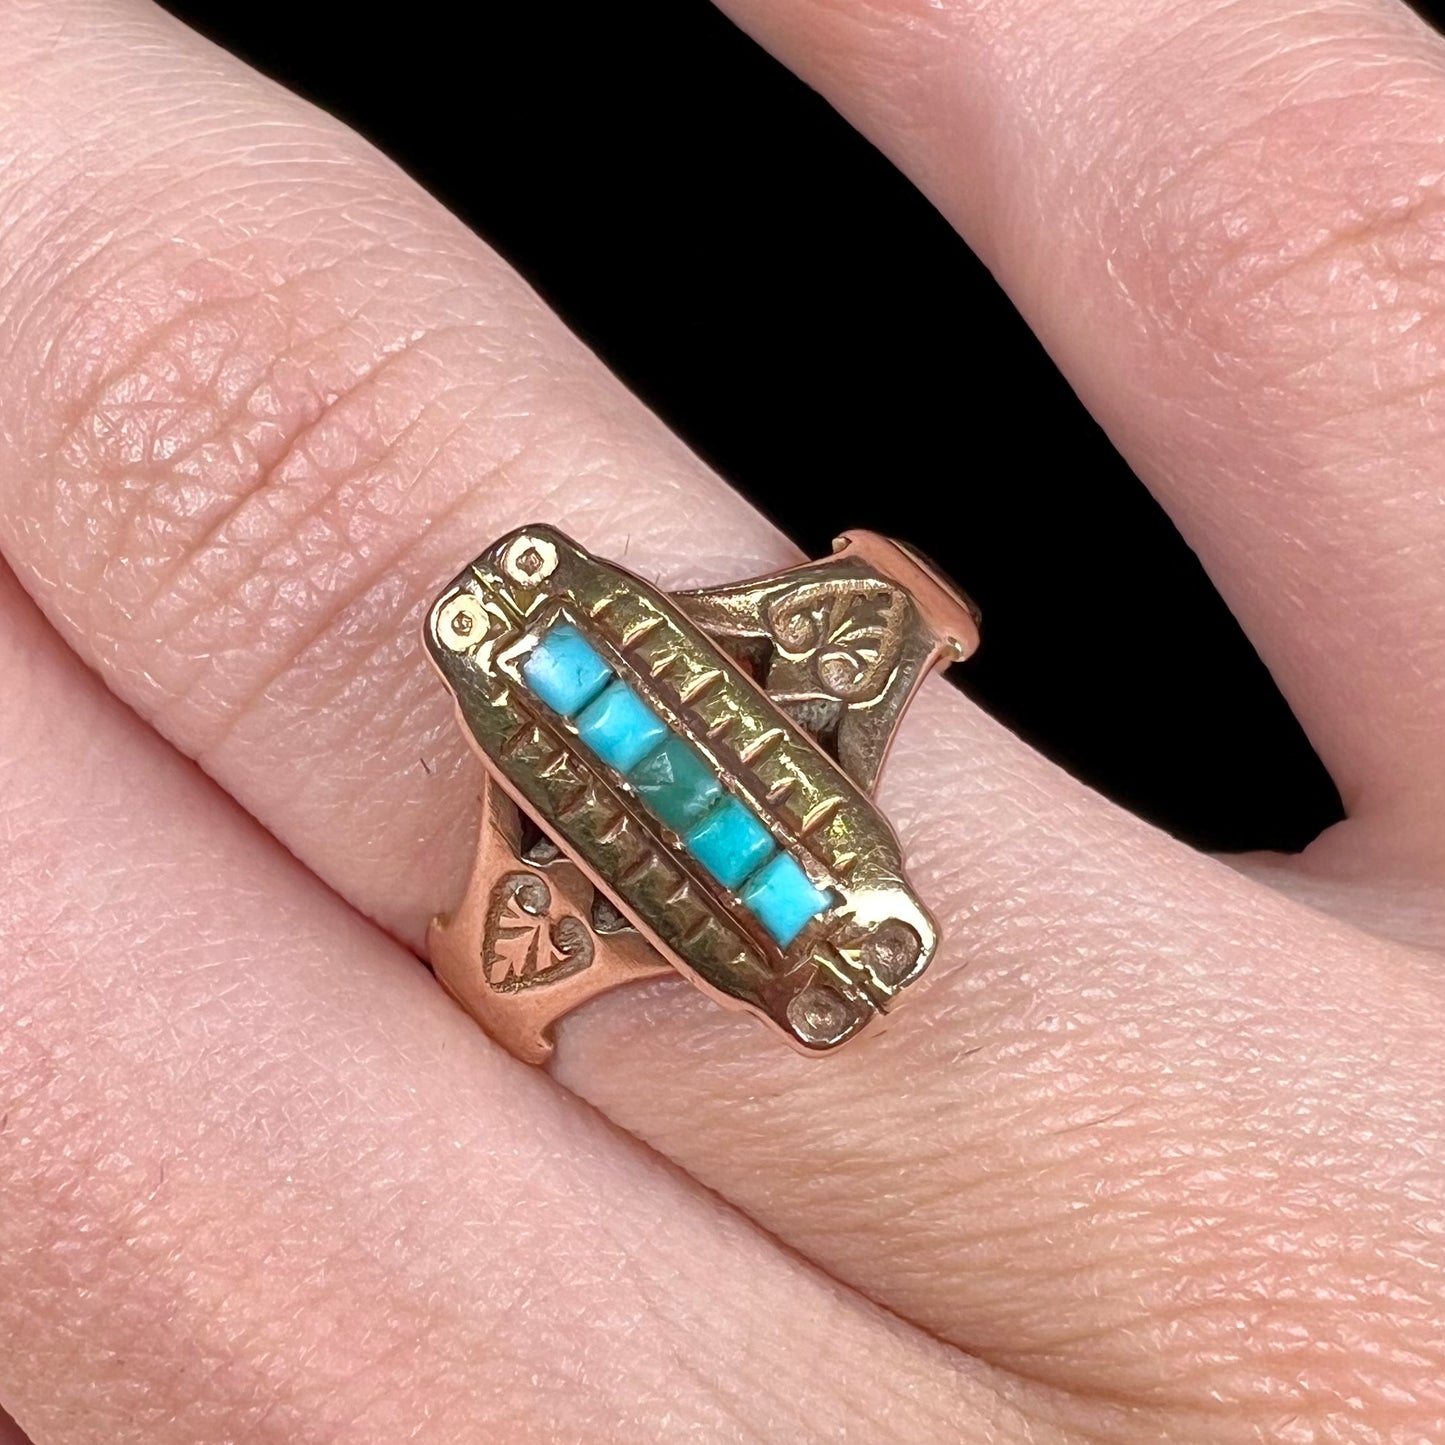 Antique yellow gold ring set with five square turquoise stones, circa 1920's.